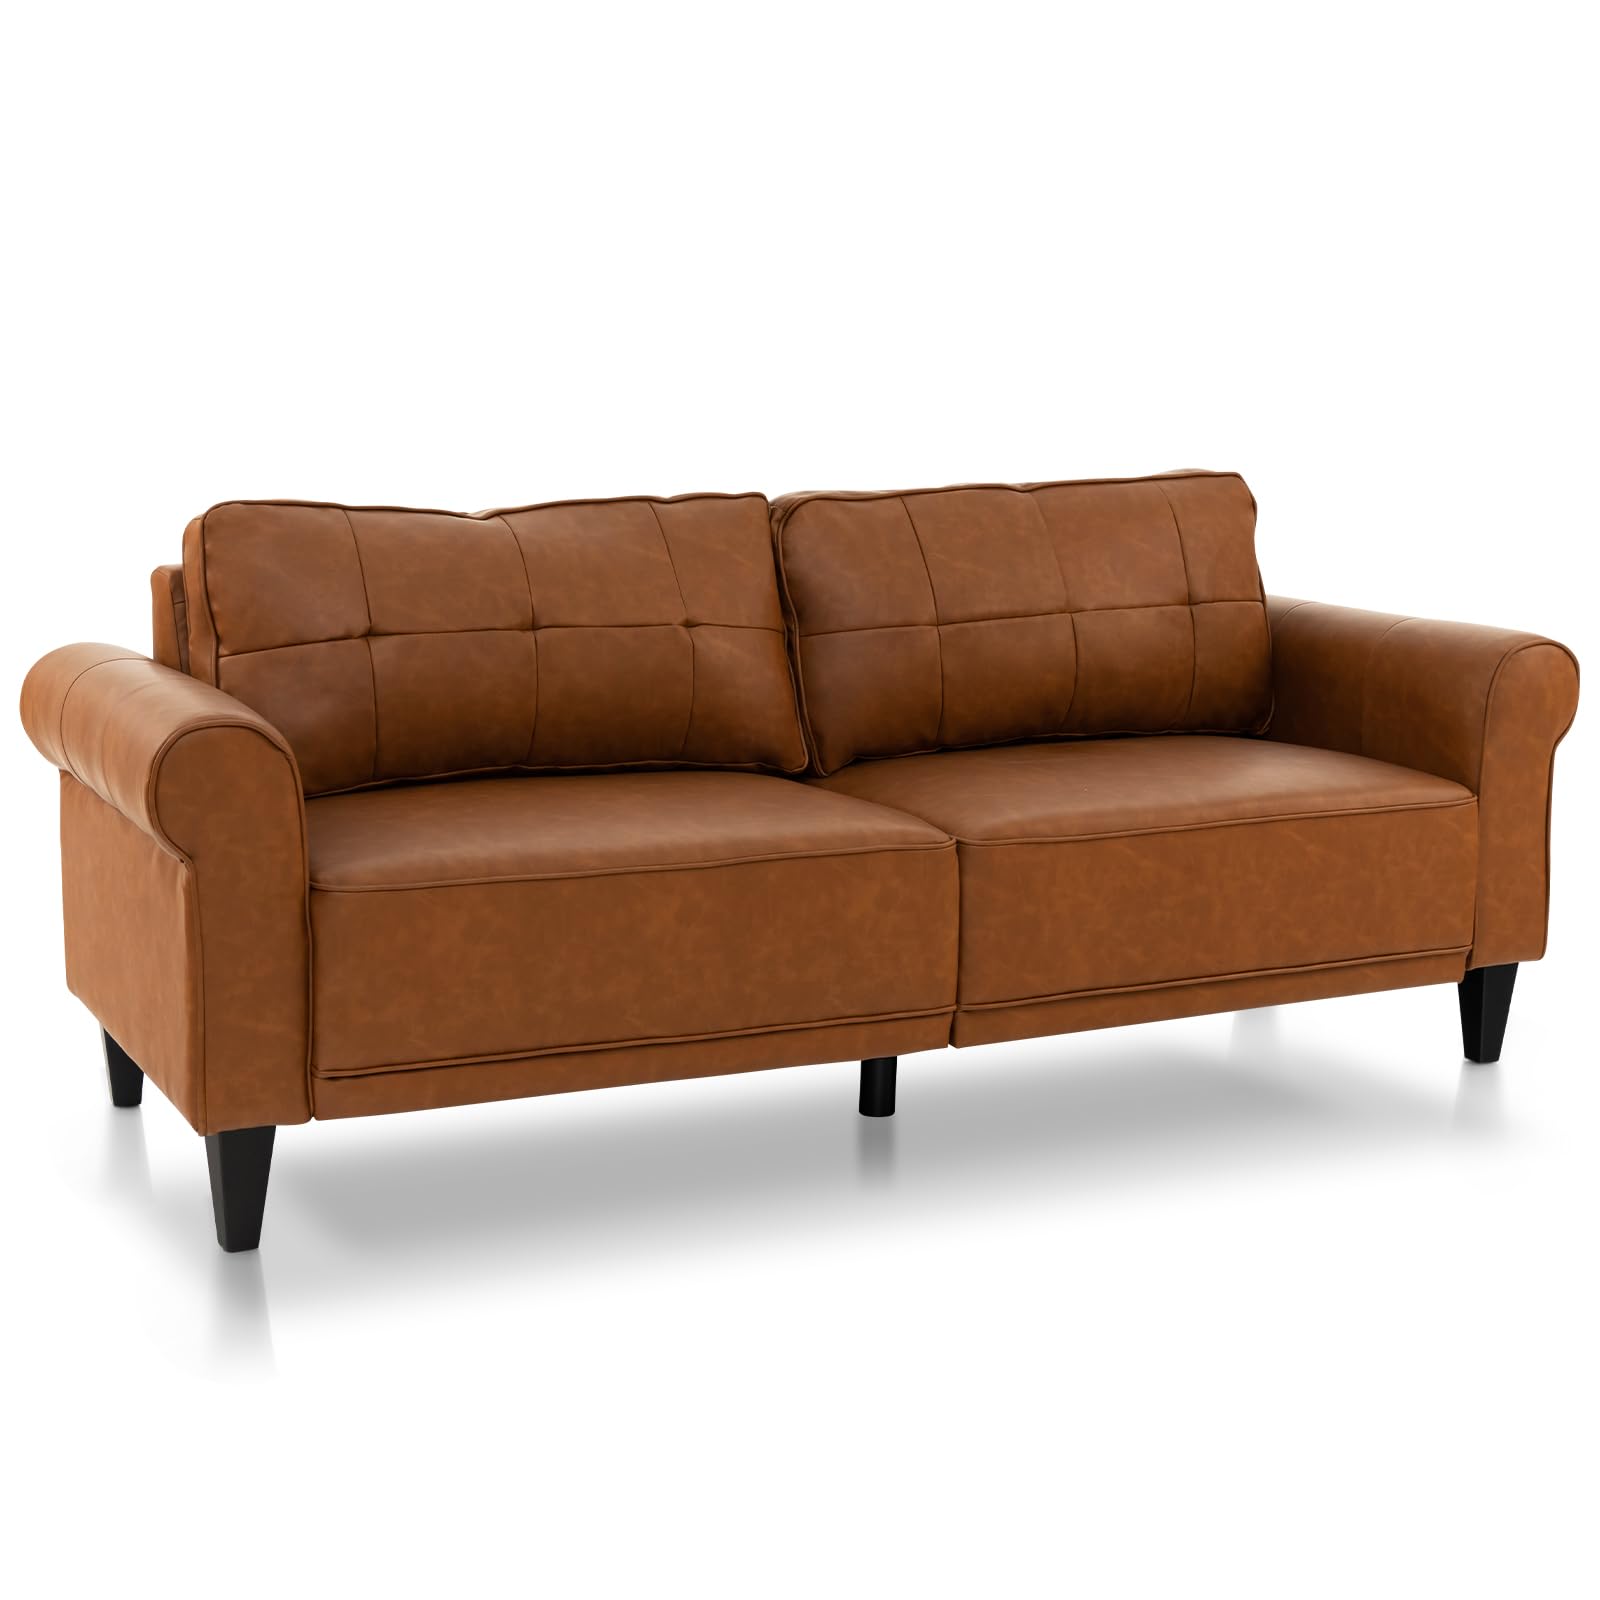 Giantex Sofa Couch, 81.5'' Upholstered 3-Seater Sofa Couch with Faux Leather (Brown)